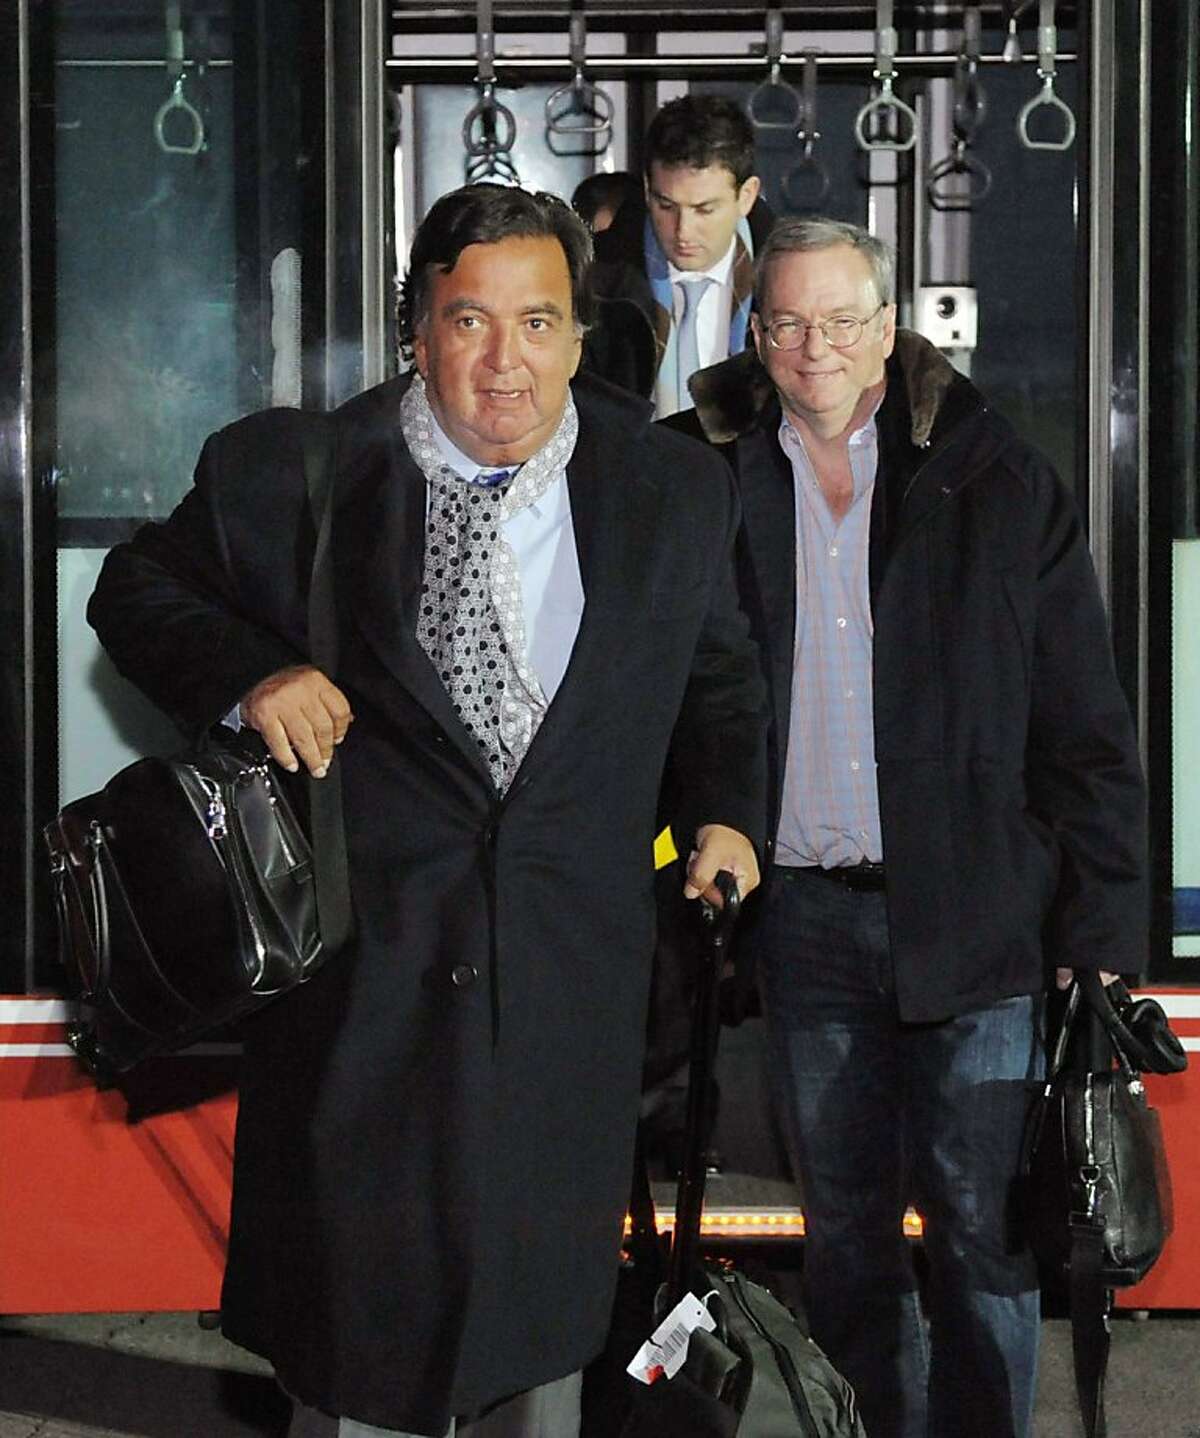 Eric Schmidt, executive chairman of Google, right, and former New Mexico Gov. Bill Richardson, left, arrive at an airport in Pyongyang, North Korea, Monday, Jan. 7, 2013. The Google chairman wants a first-hand look at North Korea's economy and social media in his private visit Monday to the communist nation, his delegation said, despite misgivings in Washington over the timing of the trip. (AP Photo/Kyodo News) JAPAN OUT, MANDATORY CREDIT, NO LICENSING IN CHINA, HONG KONG, JAPAN, SOUTH KOREA AND FRANCE